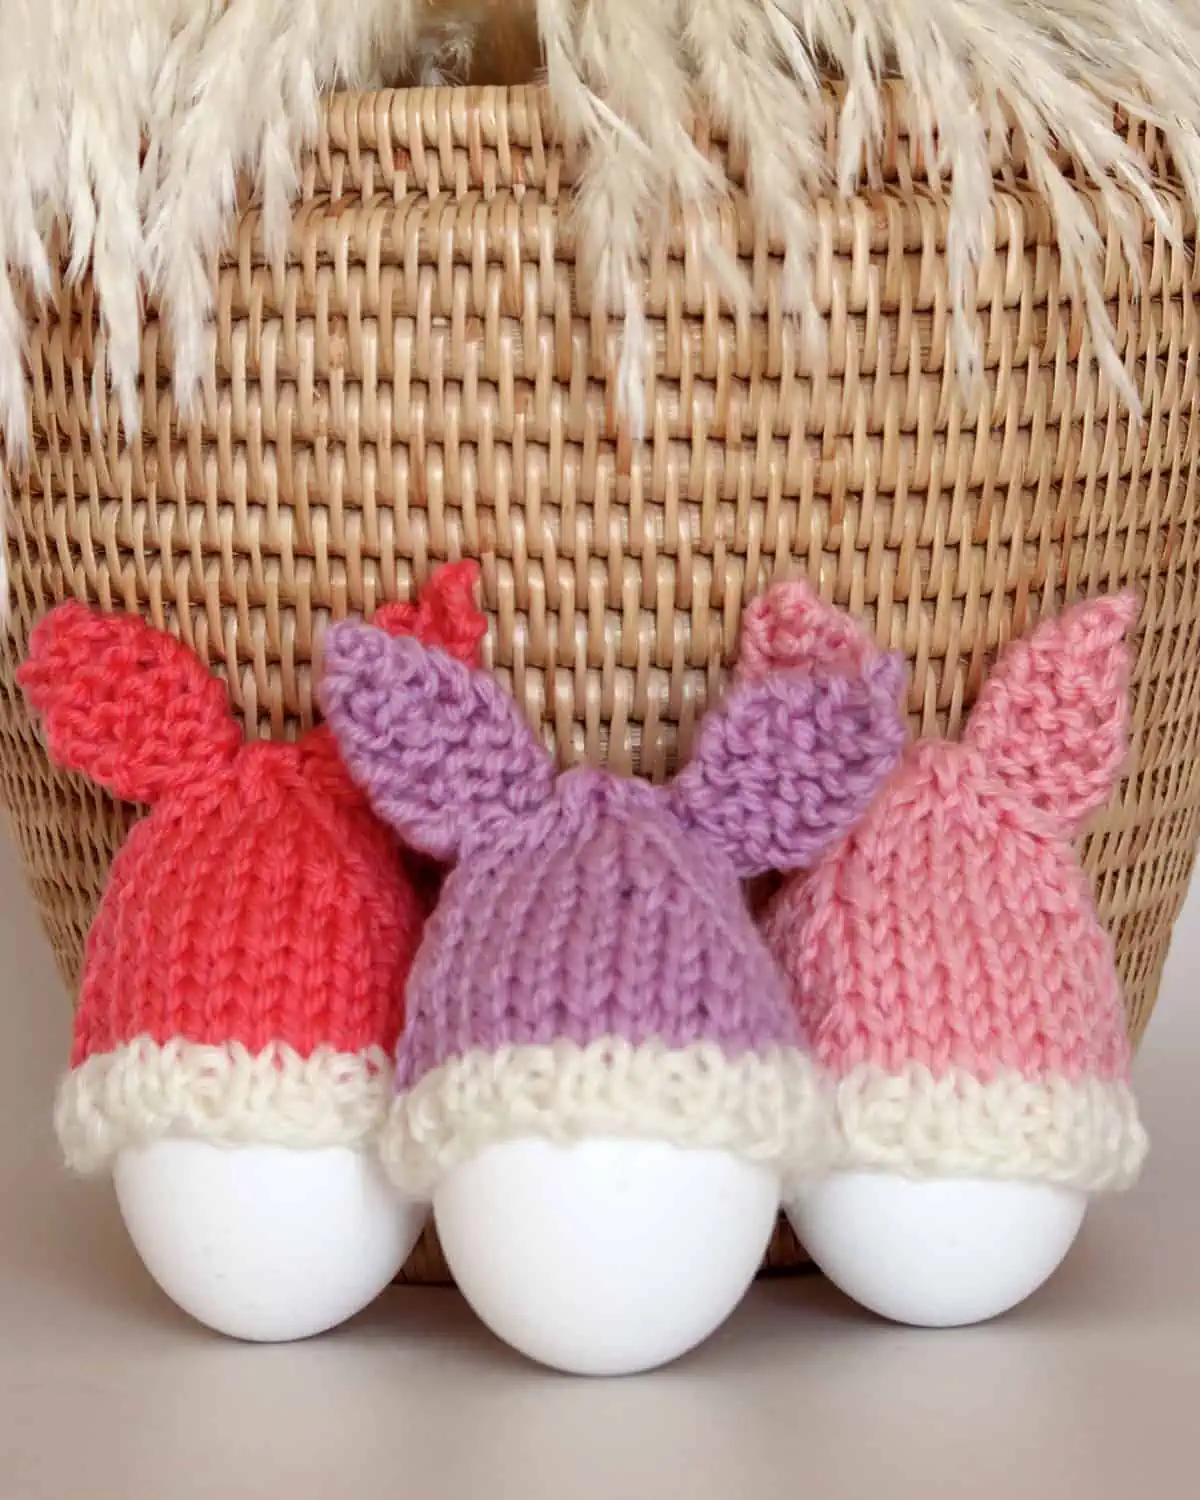 Knitted Bunny Egg Cozies in peach, purple, and pink yarn colors beside a wicker basket.